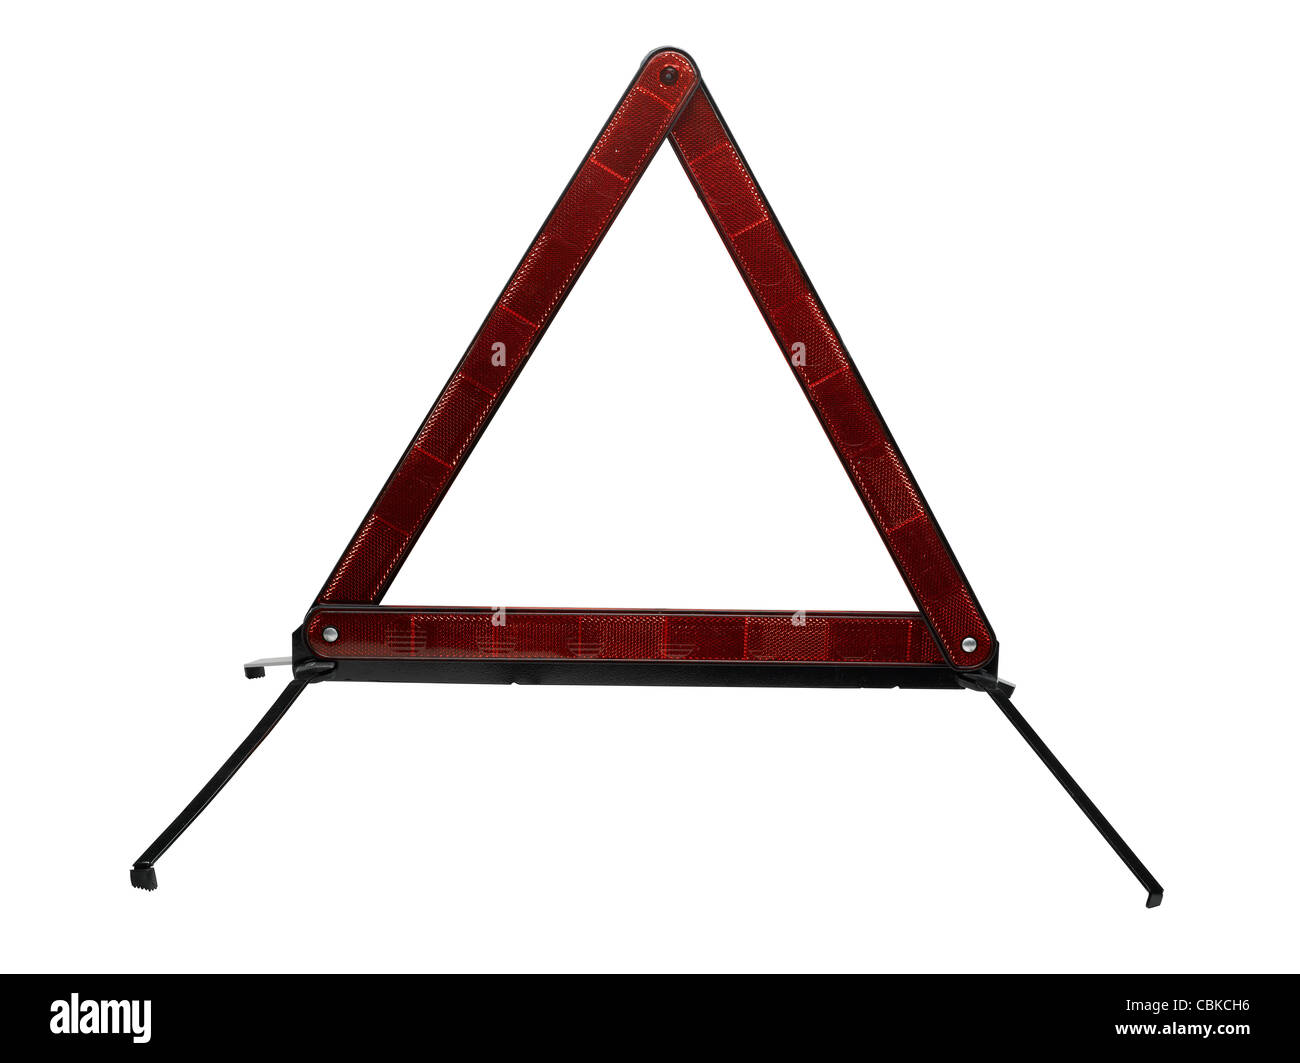 Highway Safety Triangle on white background Stock Photo